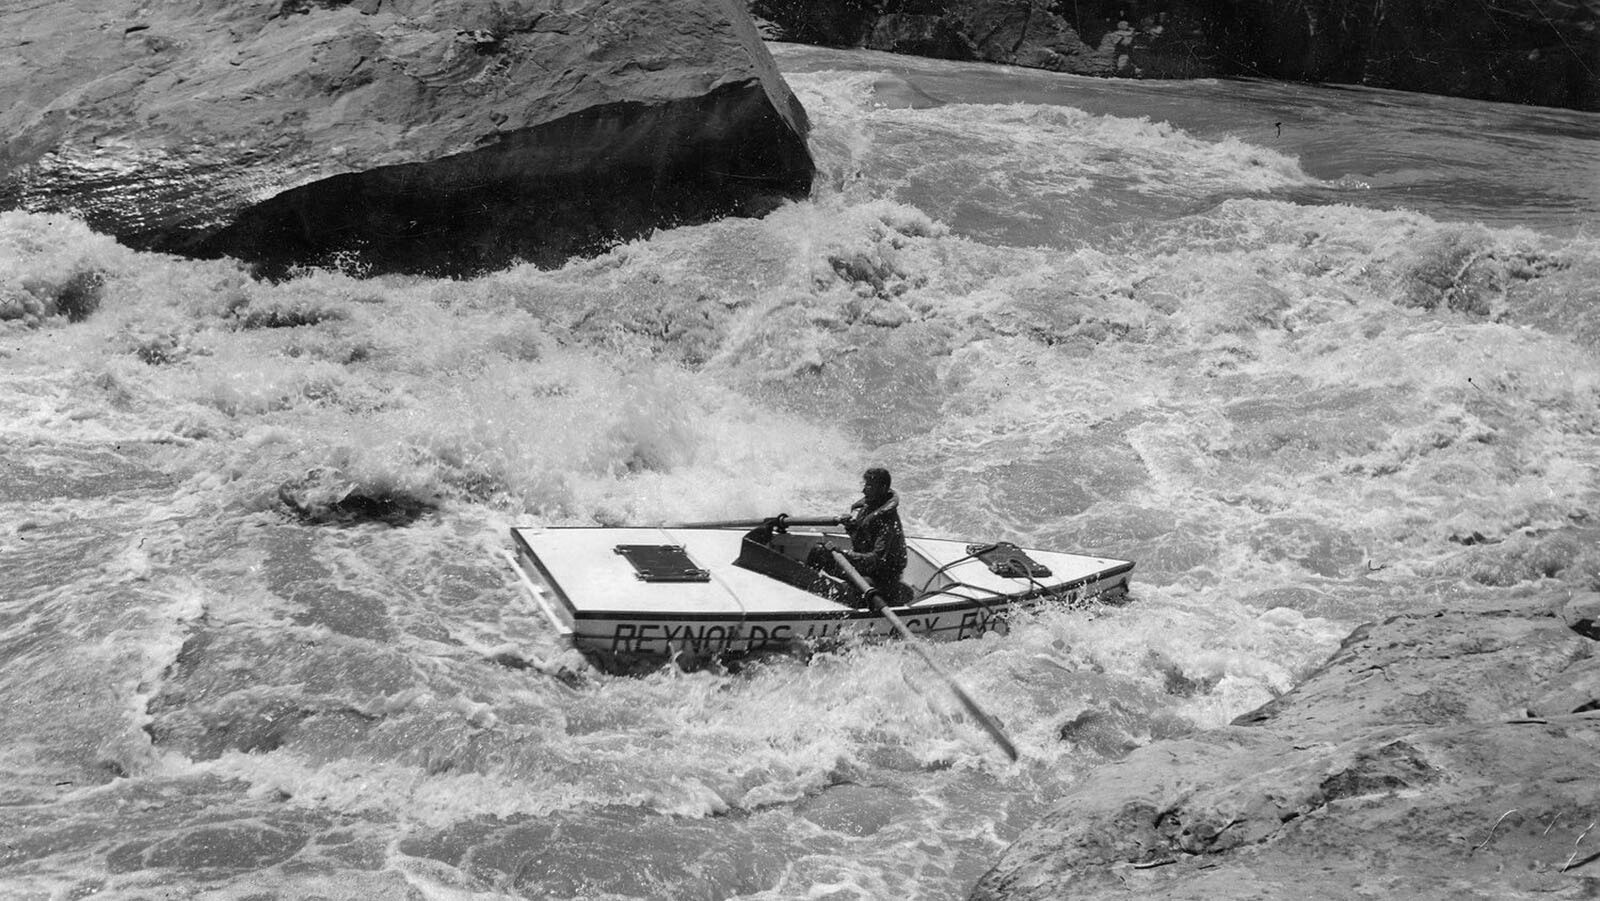 A cataract boat running Ashley Falls on the Green River prior to construction of Flaming Gorge Dam.